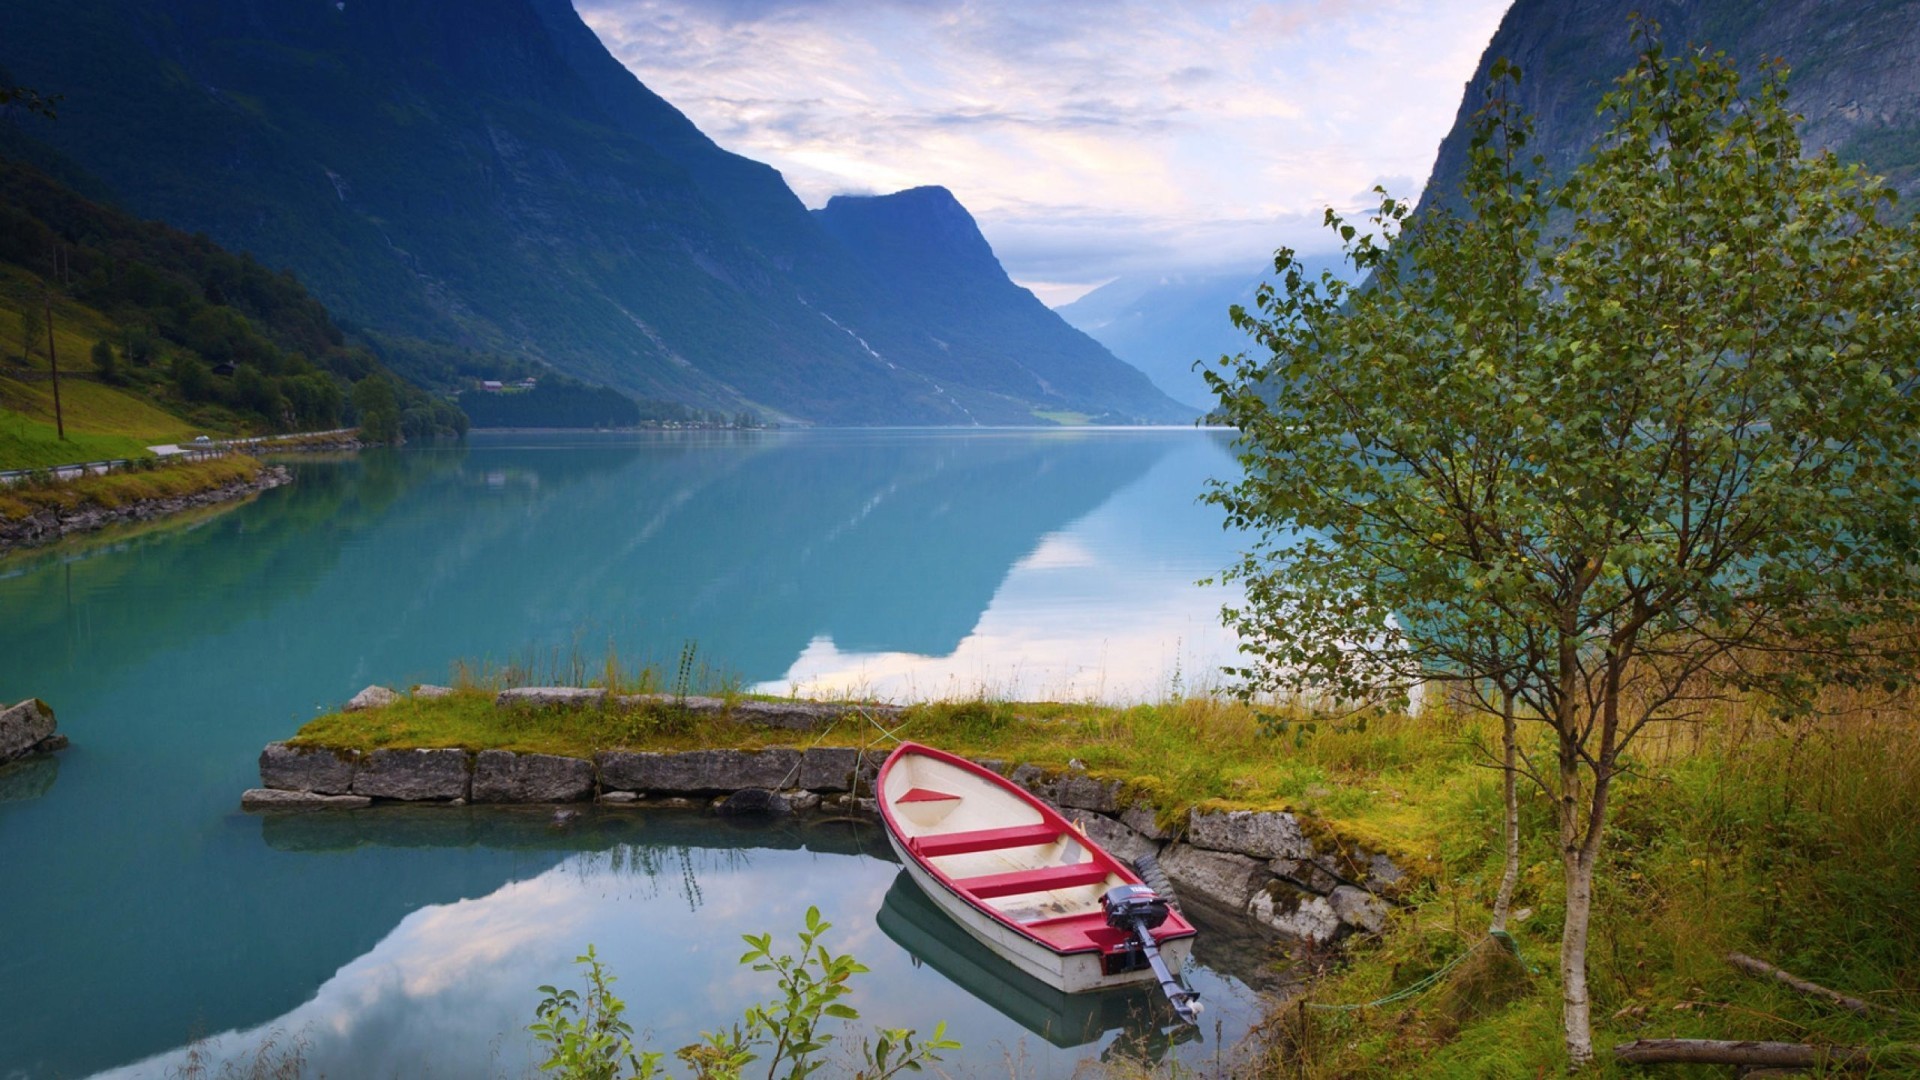 Norway Beautiful Scenery Wallpaper - Nature Photos High Quality - HD Wallpaper 